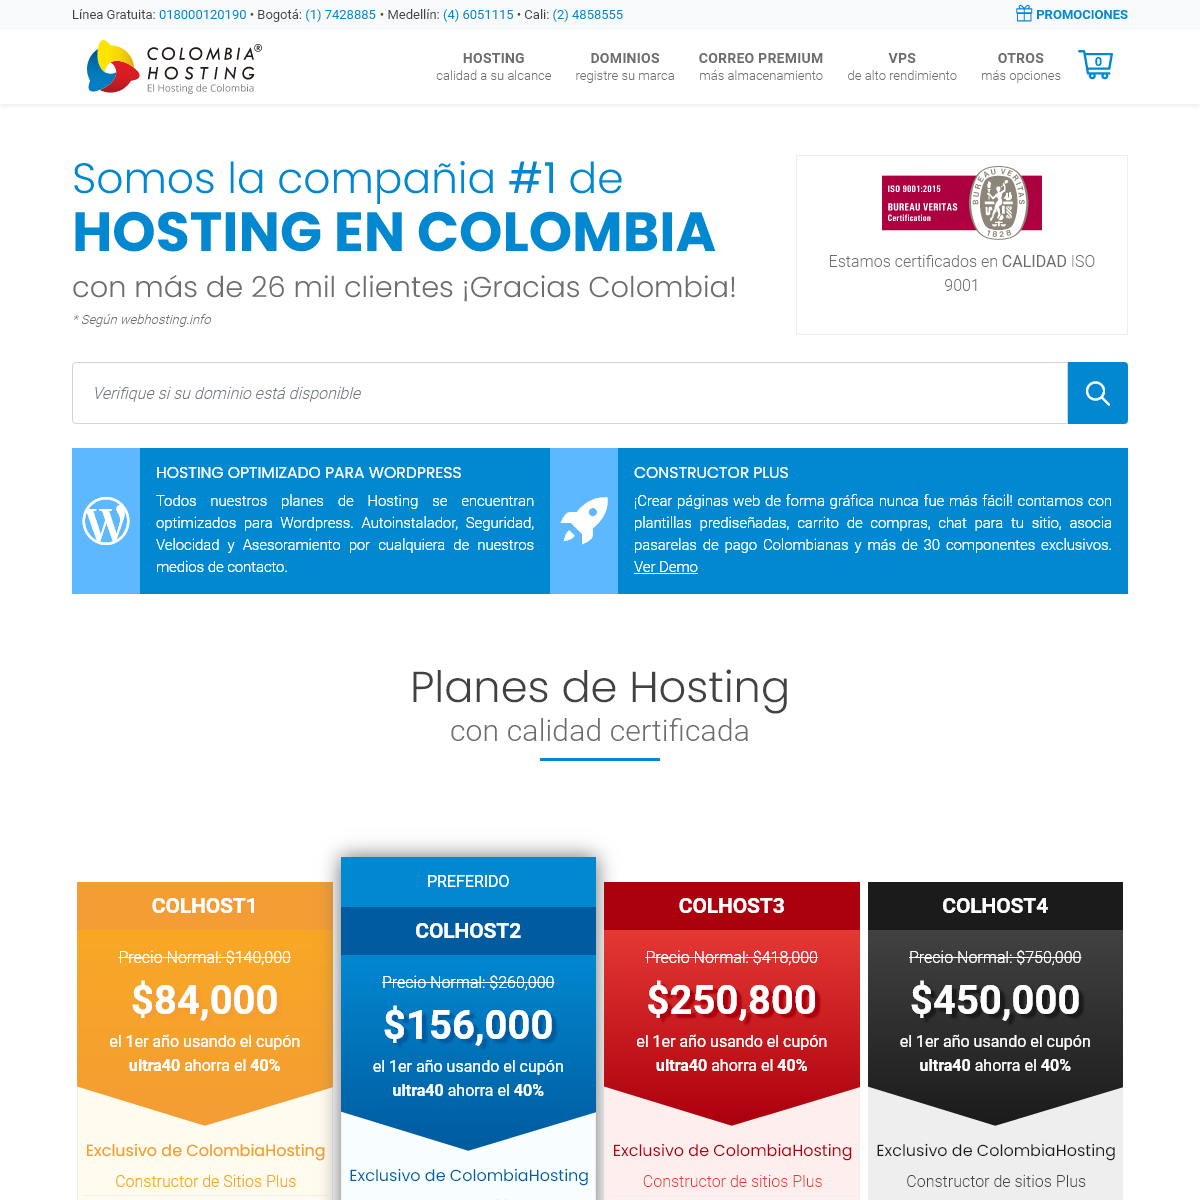 A complete backup of colombiahosting.com.co